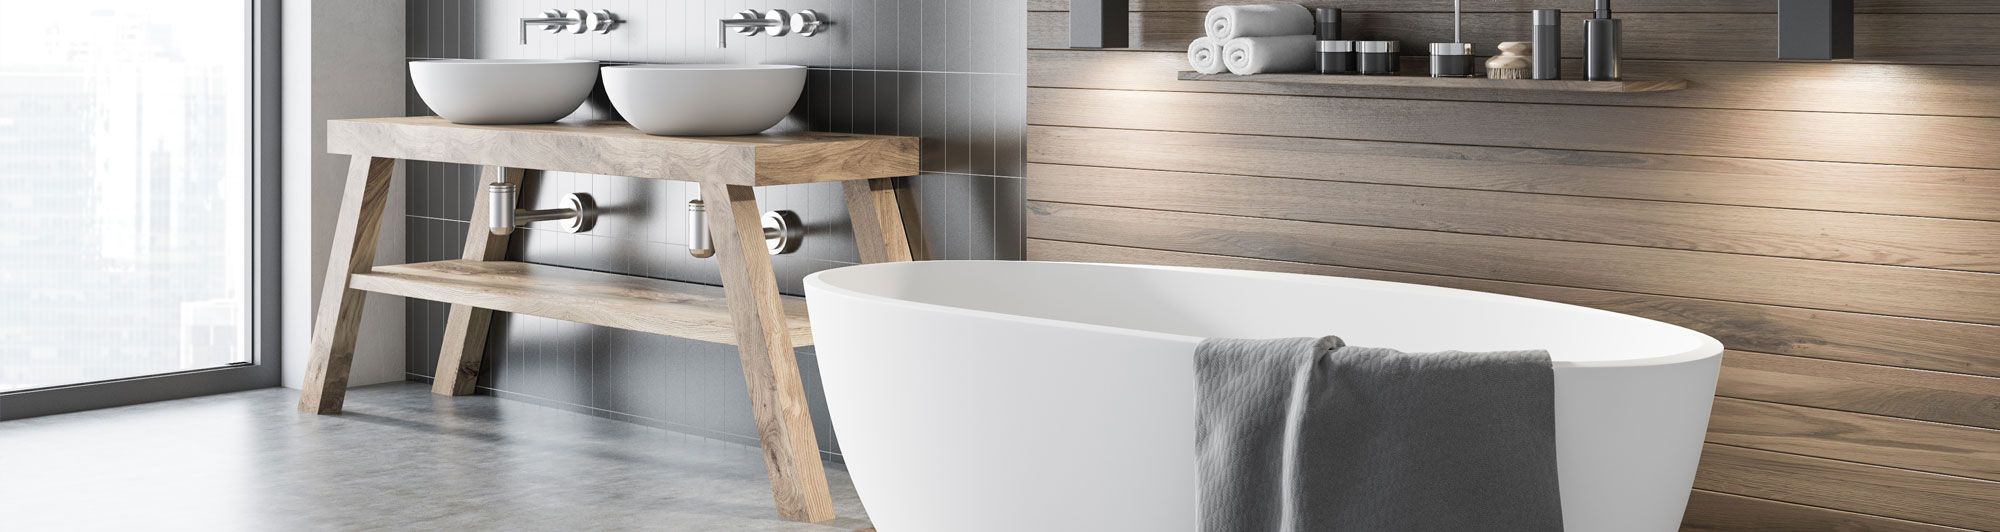 affordable bathroom and kitchen products